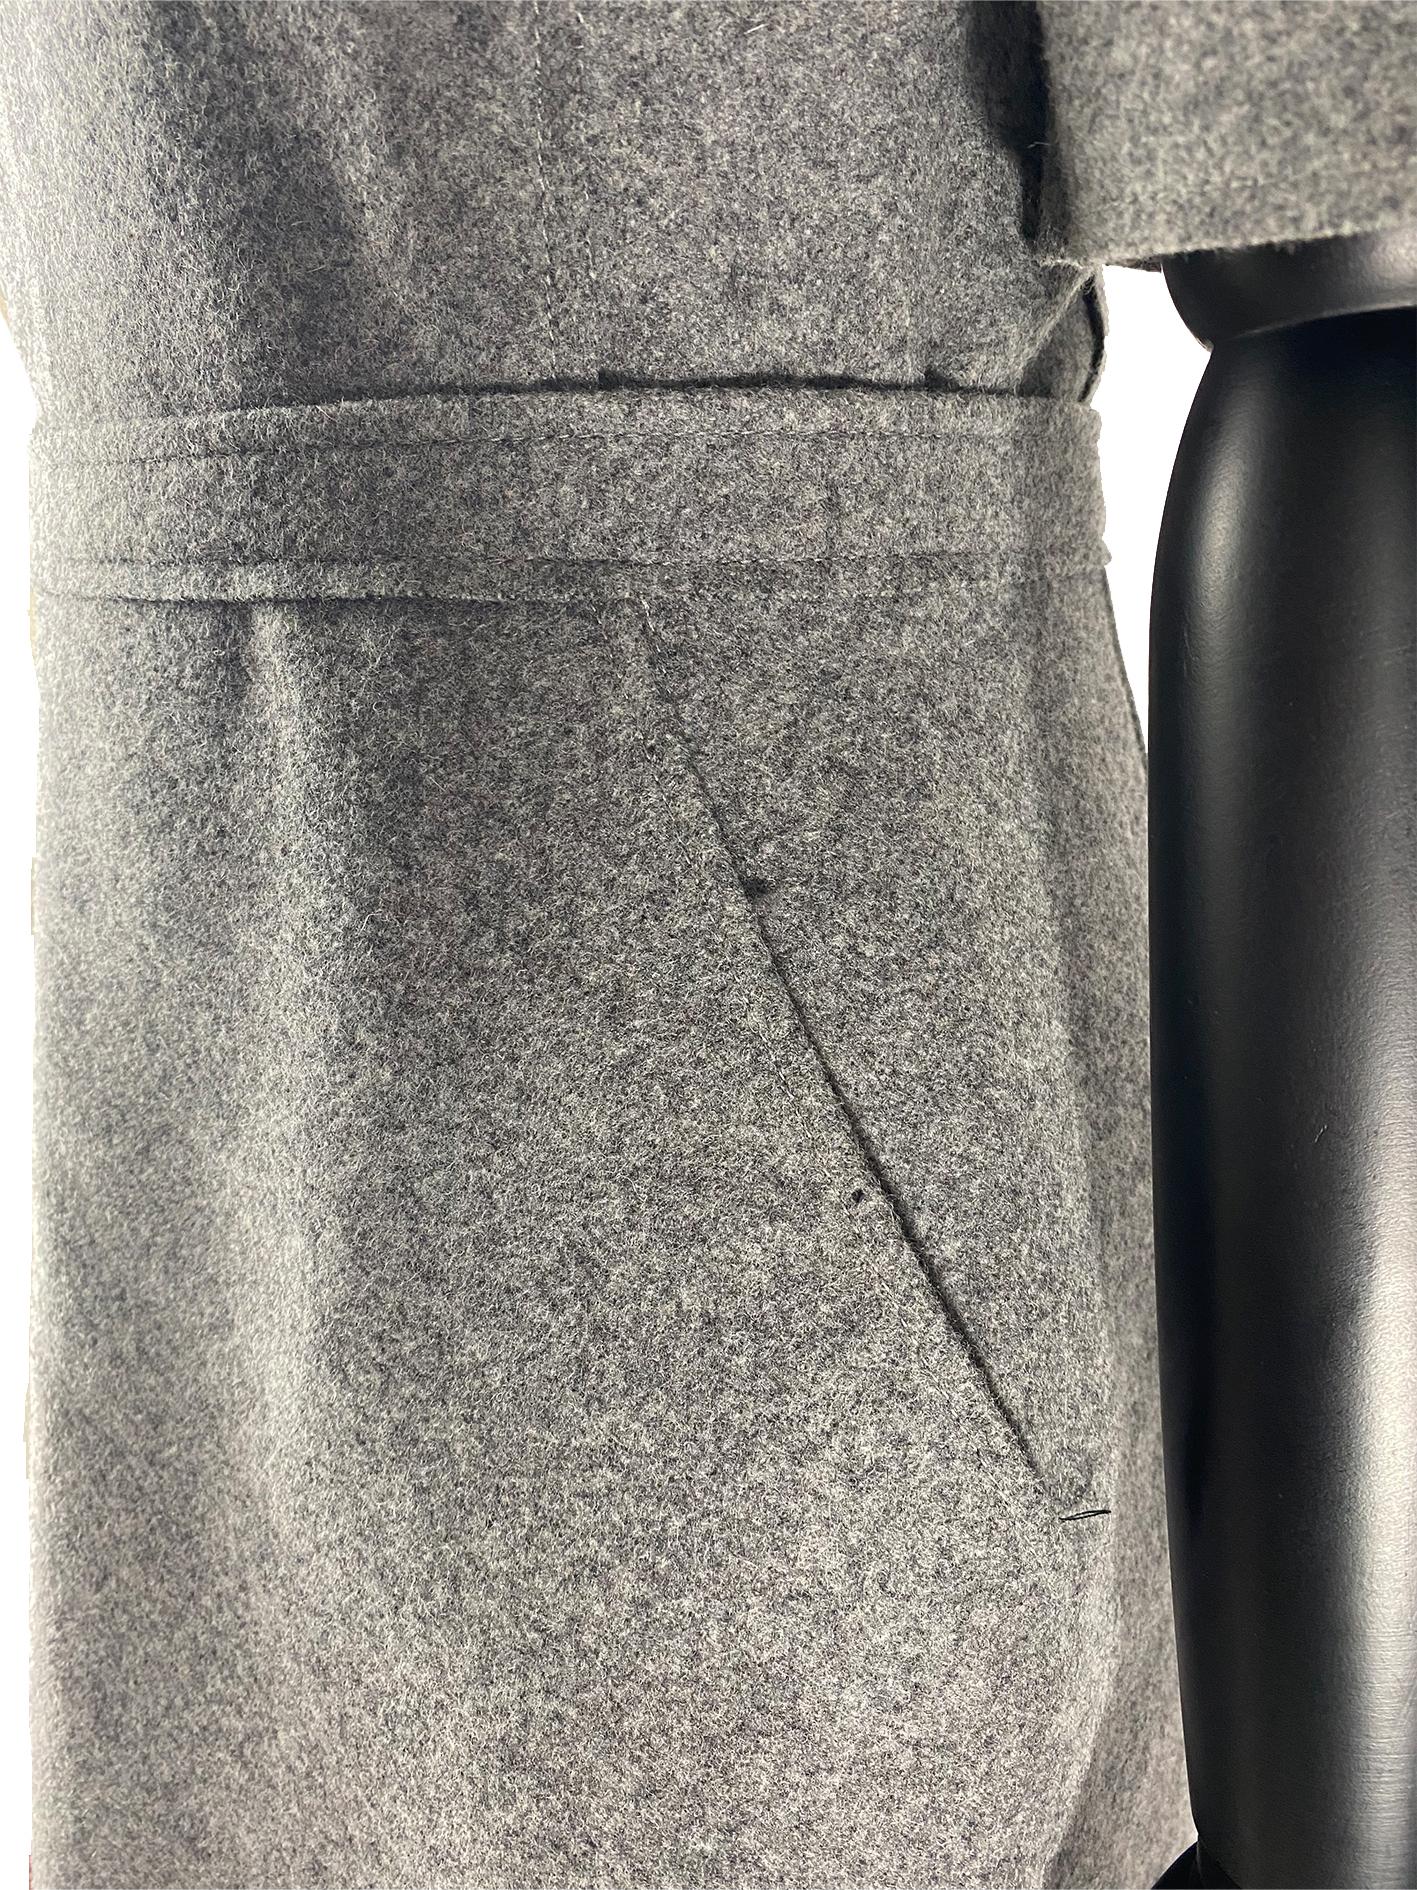 A Victoria Beckham woollen tailored shift dress in a dark marl grey with a flattering fitted bodice. The dress features a crew neckline with elbow-length sleeves. The dress is cinched at the waist with a faux waistband along with a pair of seamed